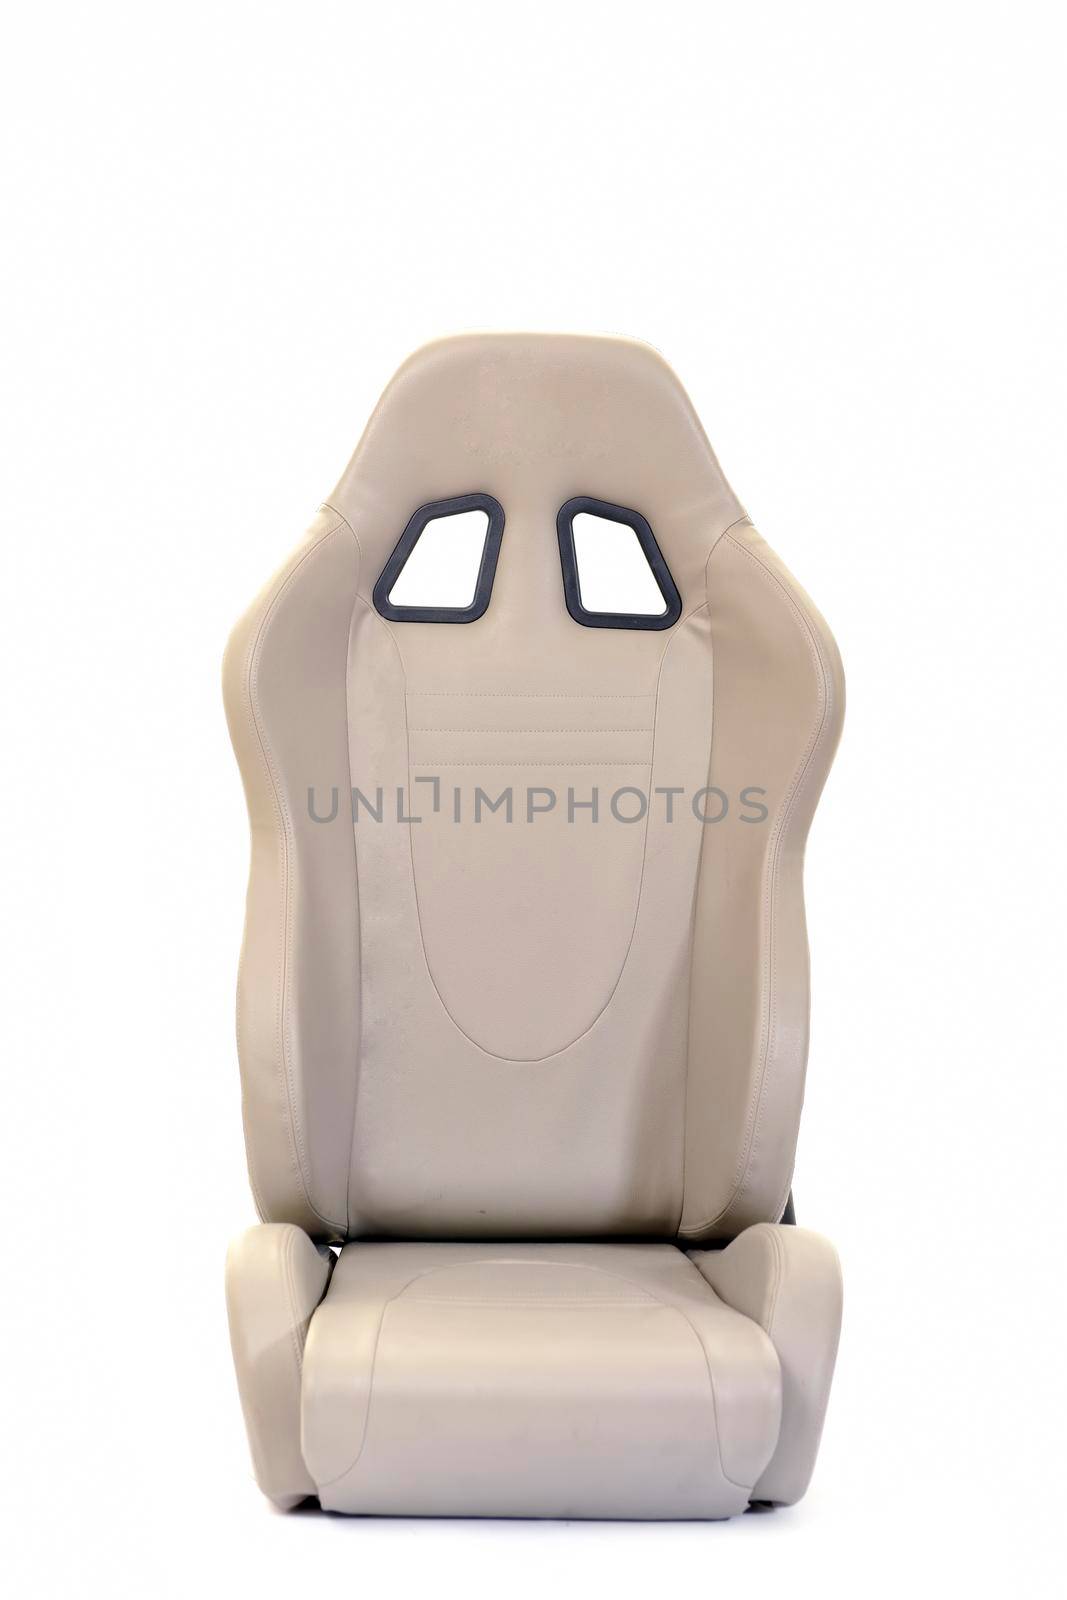 sport racing auto car seat isolated on white background